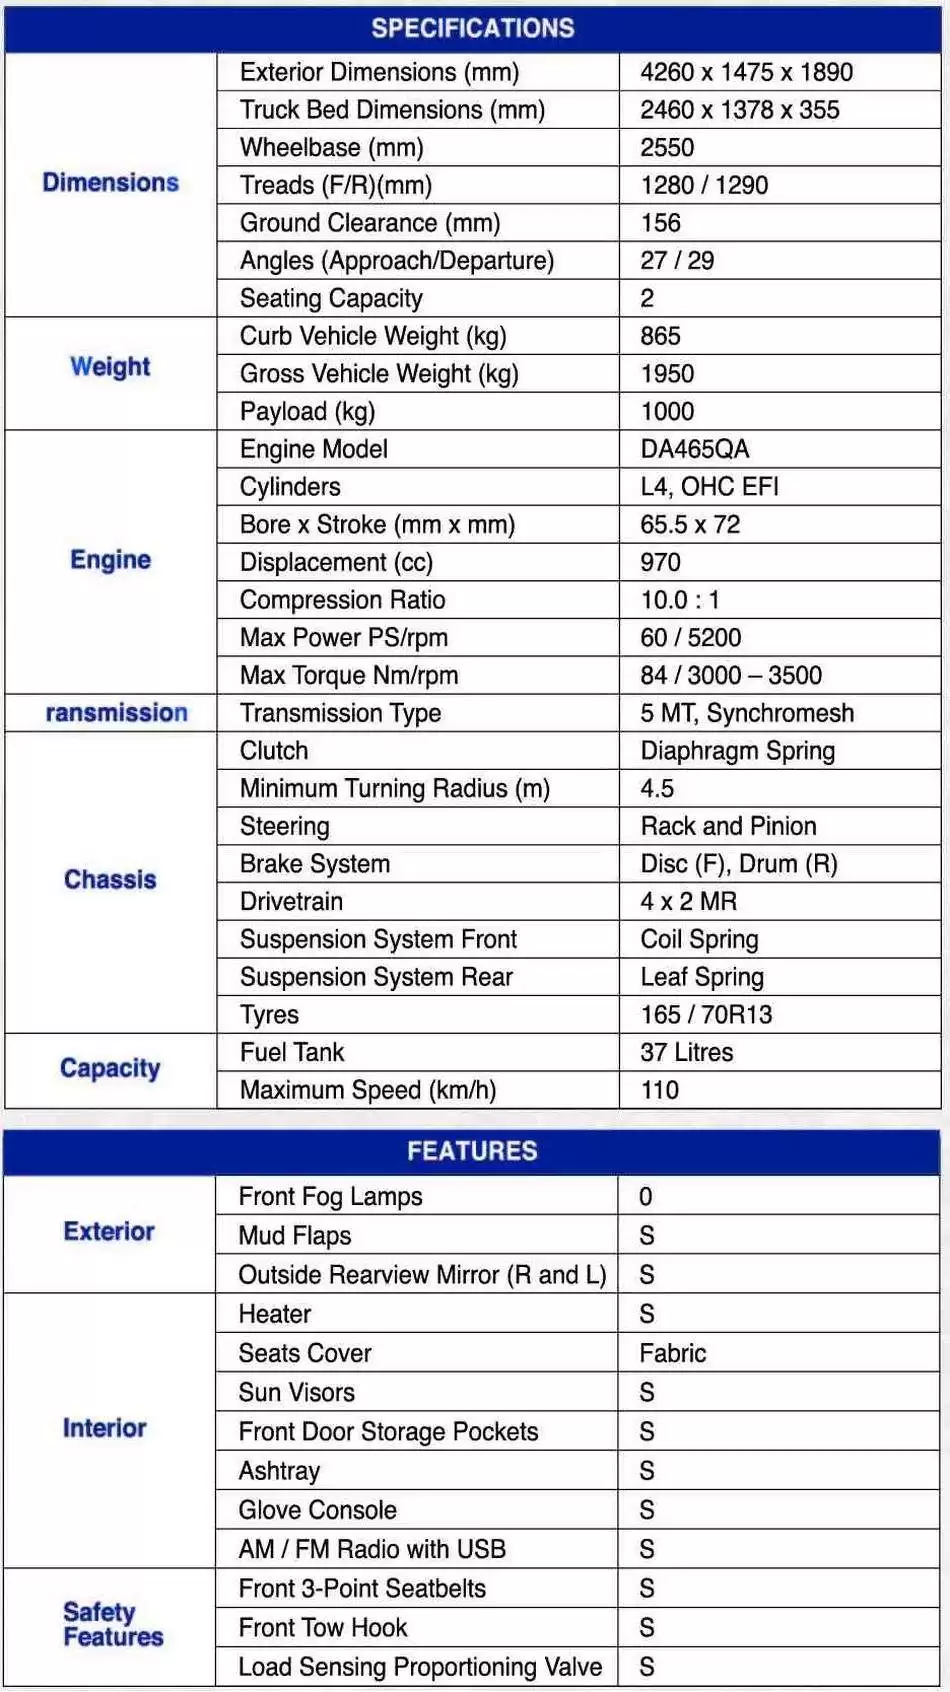 Carrier Specifications 1